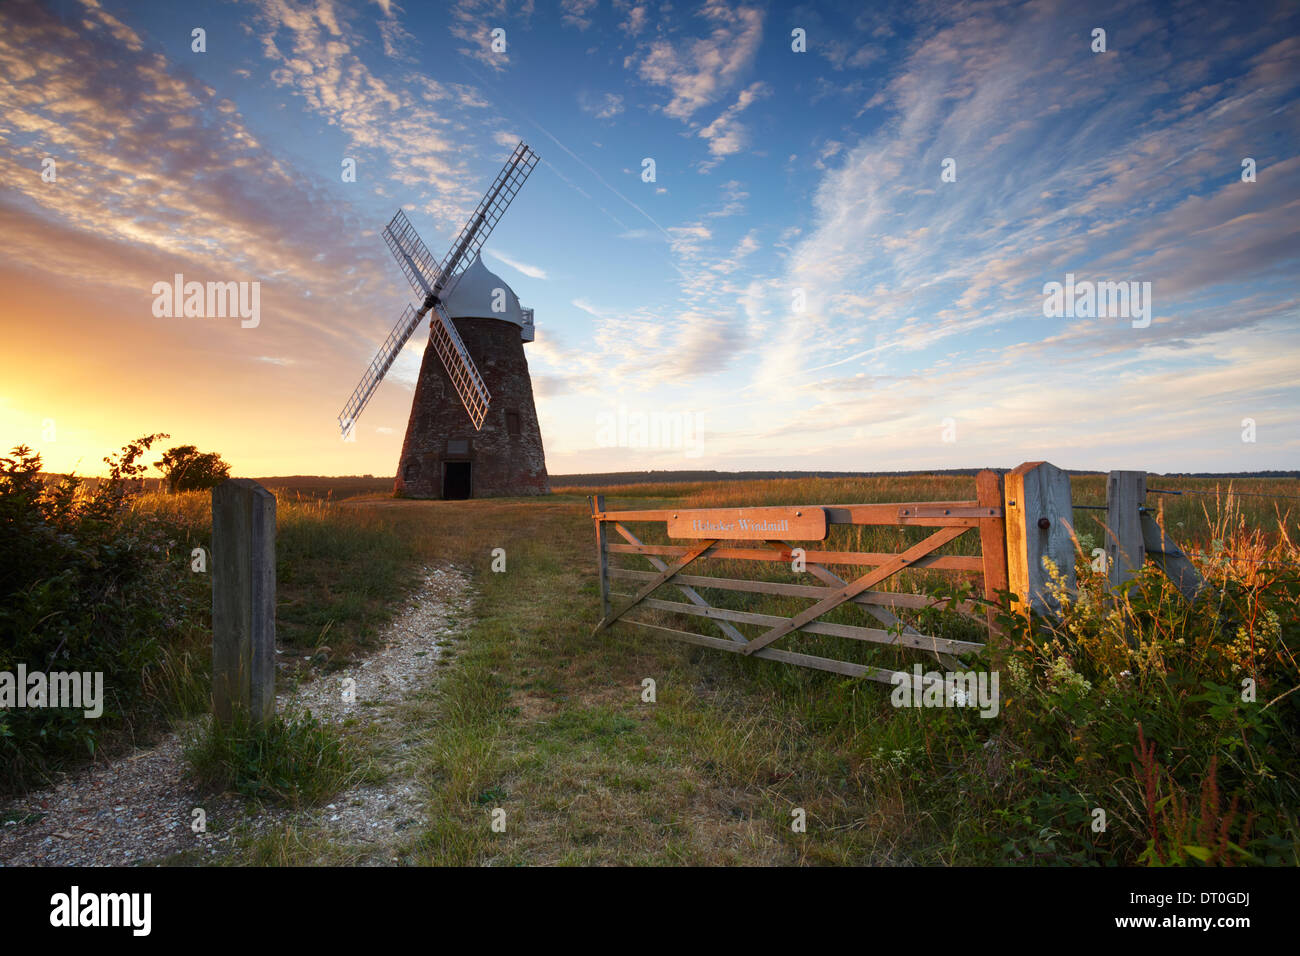 A beautiful summers evening at Halnaker windmill. Located high up on a hilltop on the South Downs National Park Stock Photo